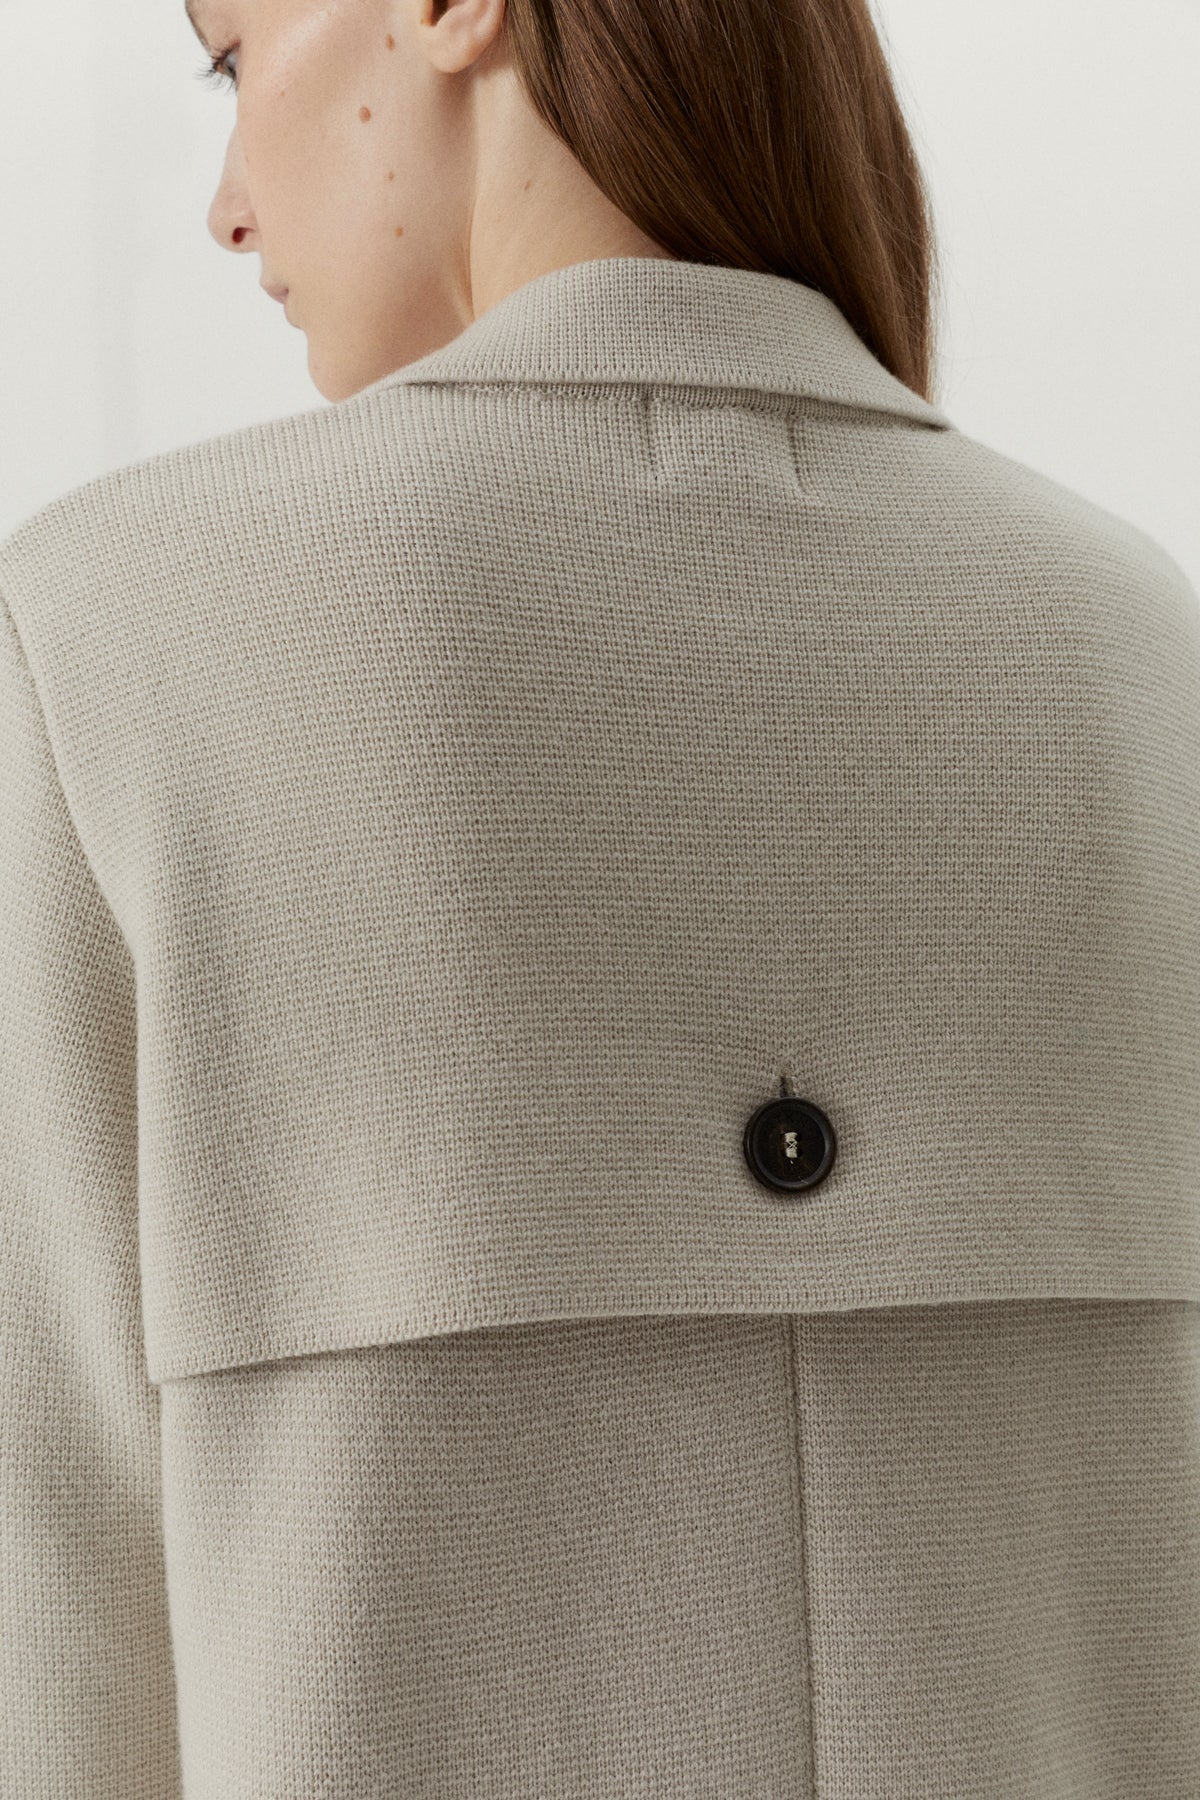 Pearl | The Merino Wool Double Breasted Jacket